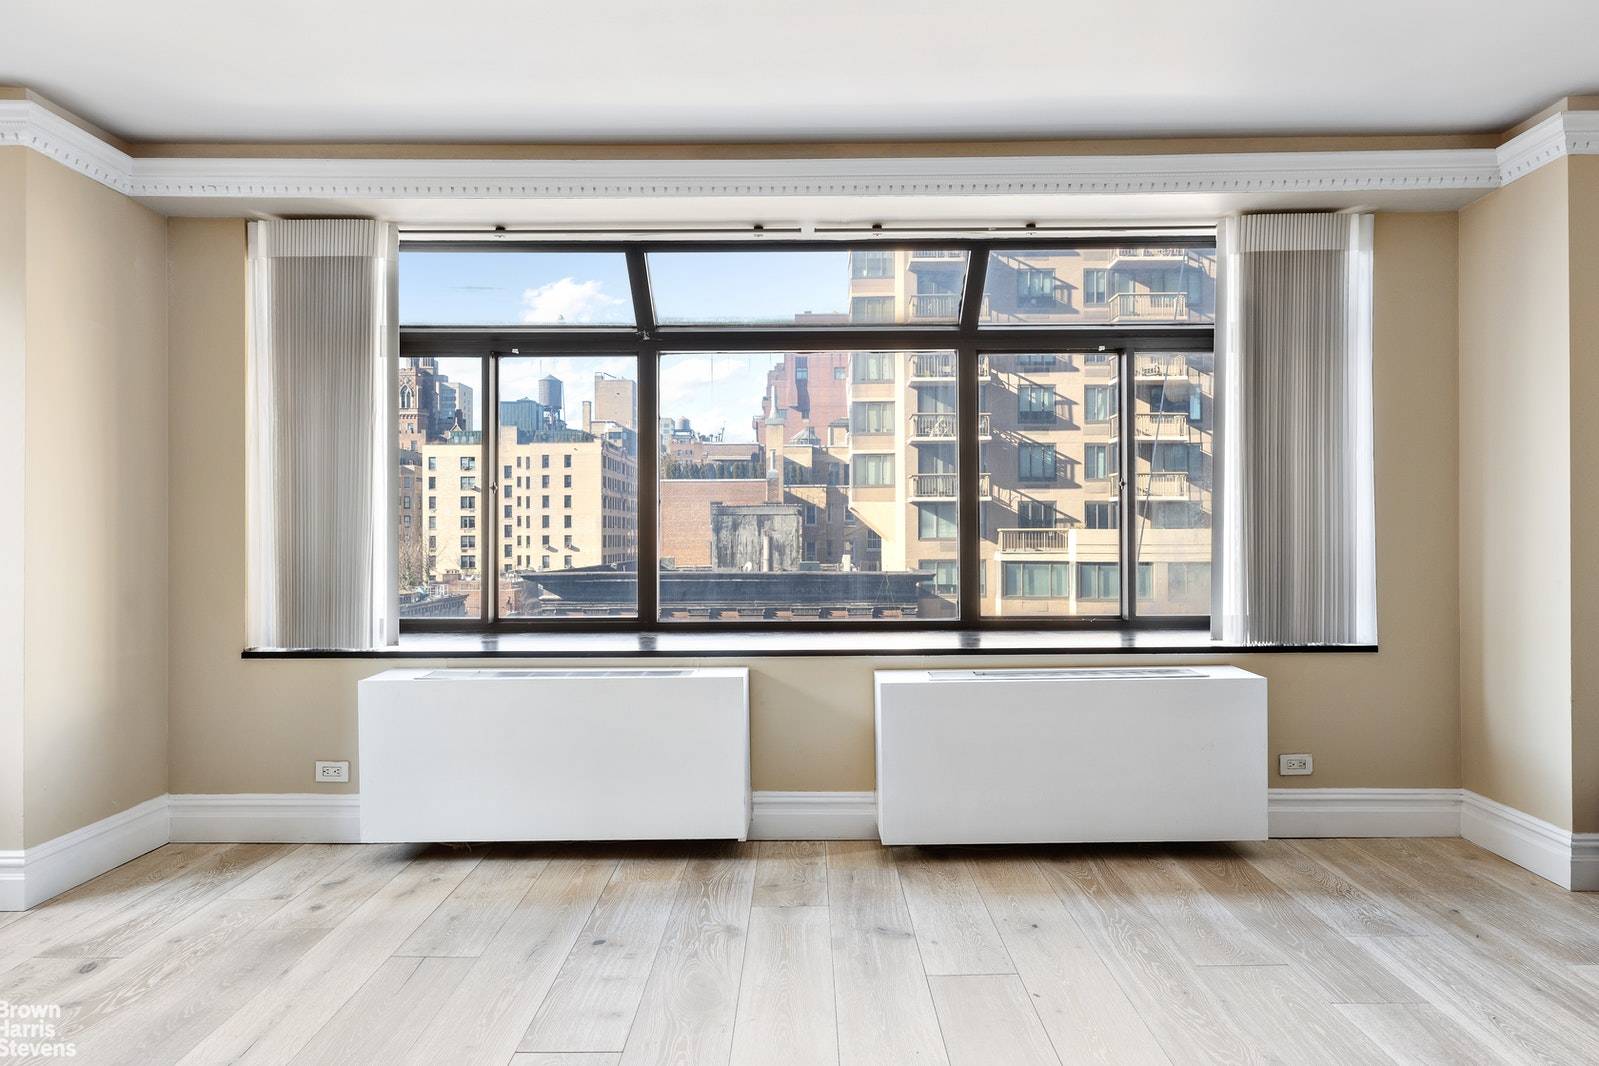 Residence 9A at Le Trianon is a sunny 2 bedroom, 2 bathroom home with an open floorplan with all of the luxury the Upper East Side has to offer.